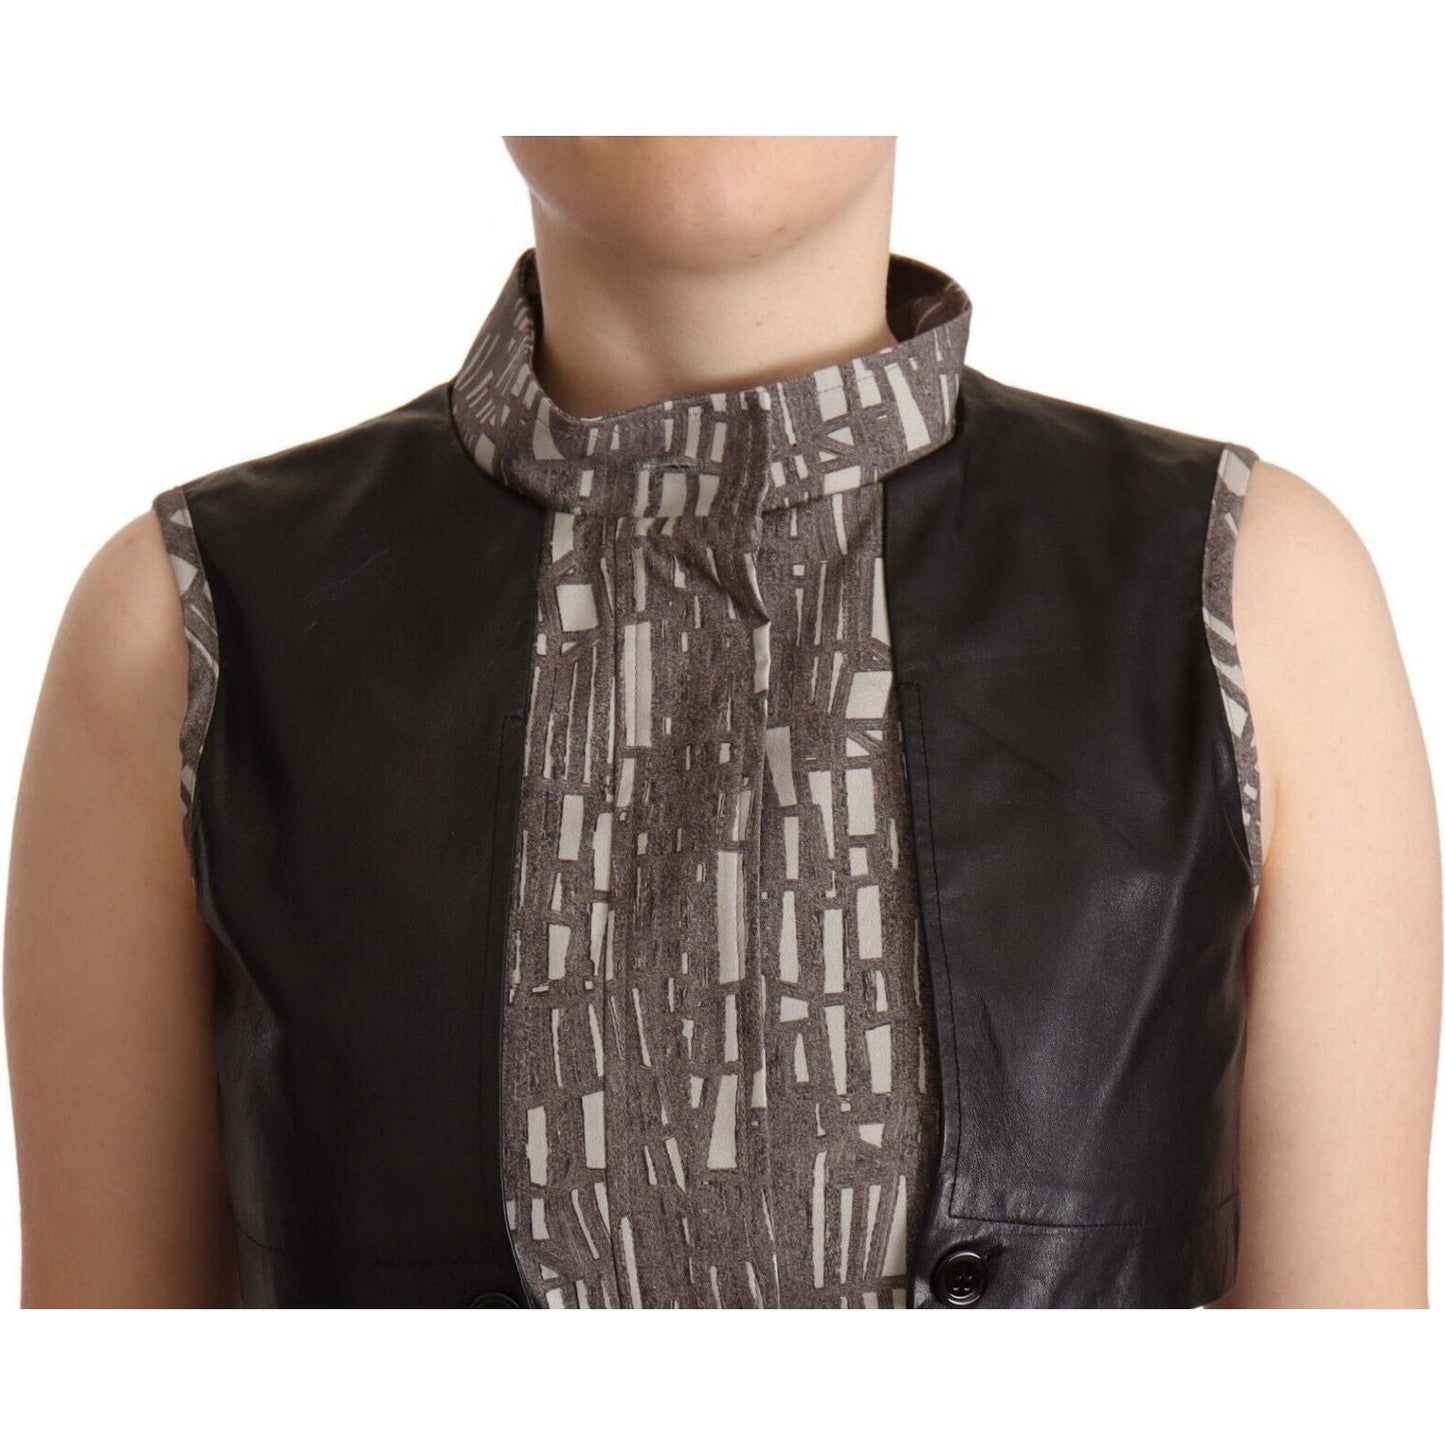 Comeforbreakfast Sleeveless Turtleneck Chic Top brown-black-vest-leather-sleeveless-top-blouse WOMAN TOPS AND SHIRTS s-l1600-3-33-3f7521c3-b49.jpg